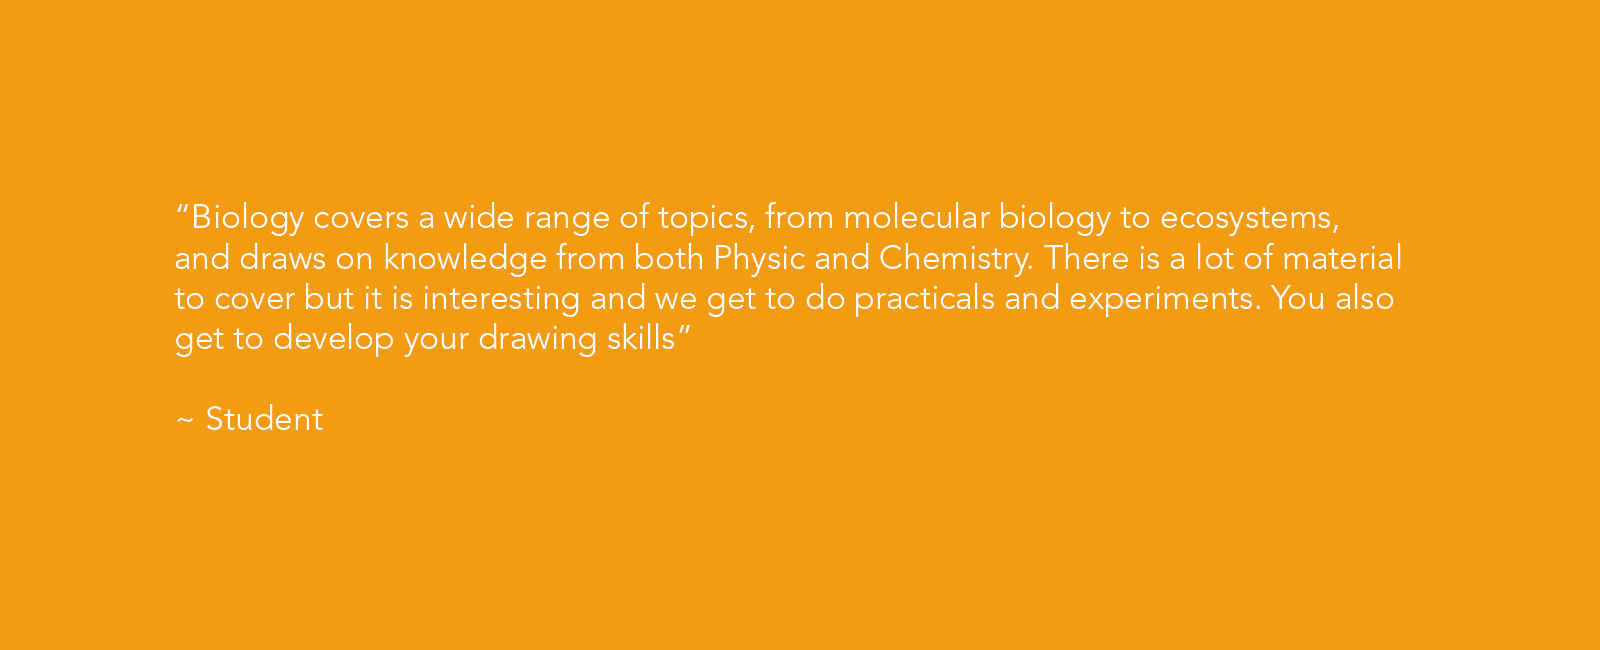 as-biology-promo-quote